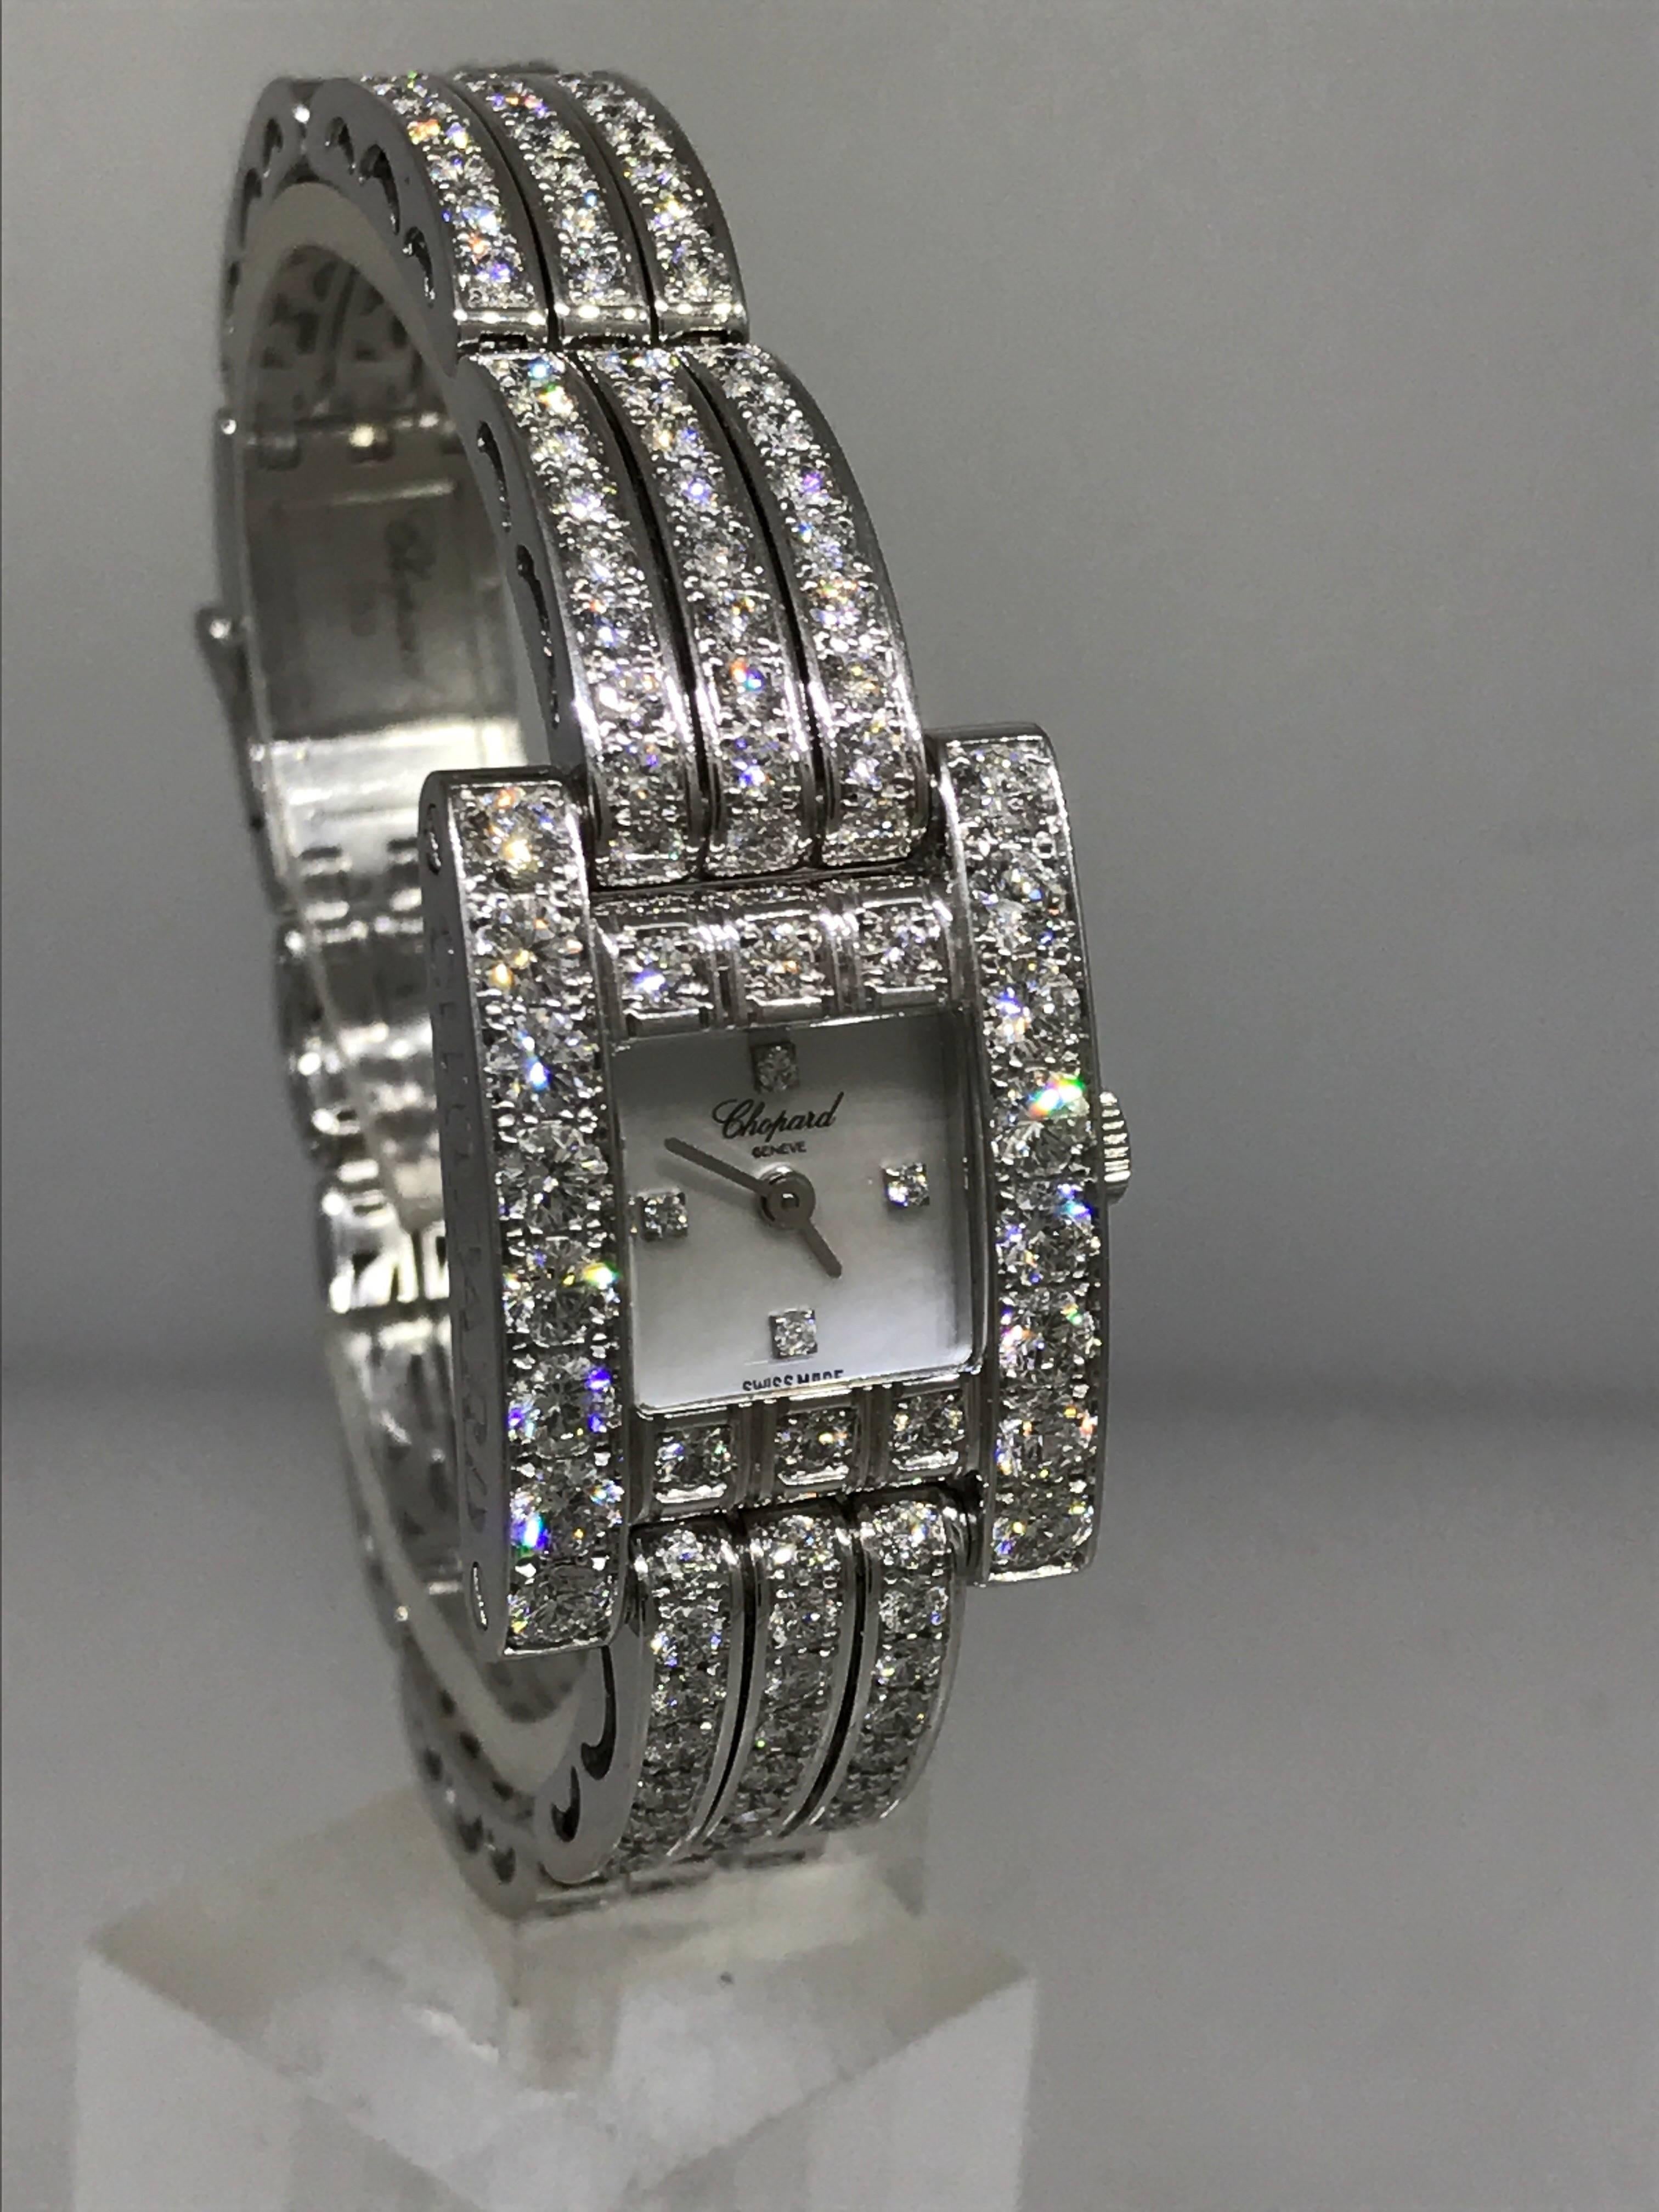 Chopard ladies H watch 

Model number: 10/6966-1001

100% Authentic

Brand New (Old Stock

Comes with original Chopard box, certificate of authenticity and warranty, and instruction manual

18 Karat white gold case and bracelet

216 diamonds on the